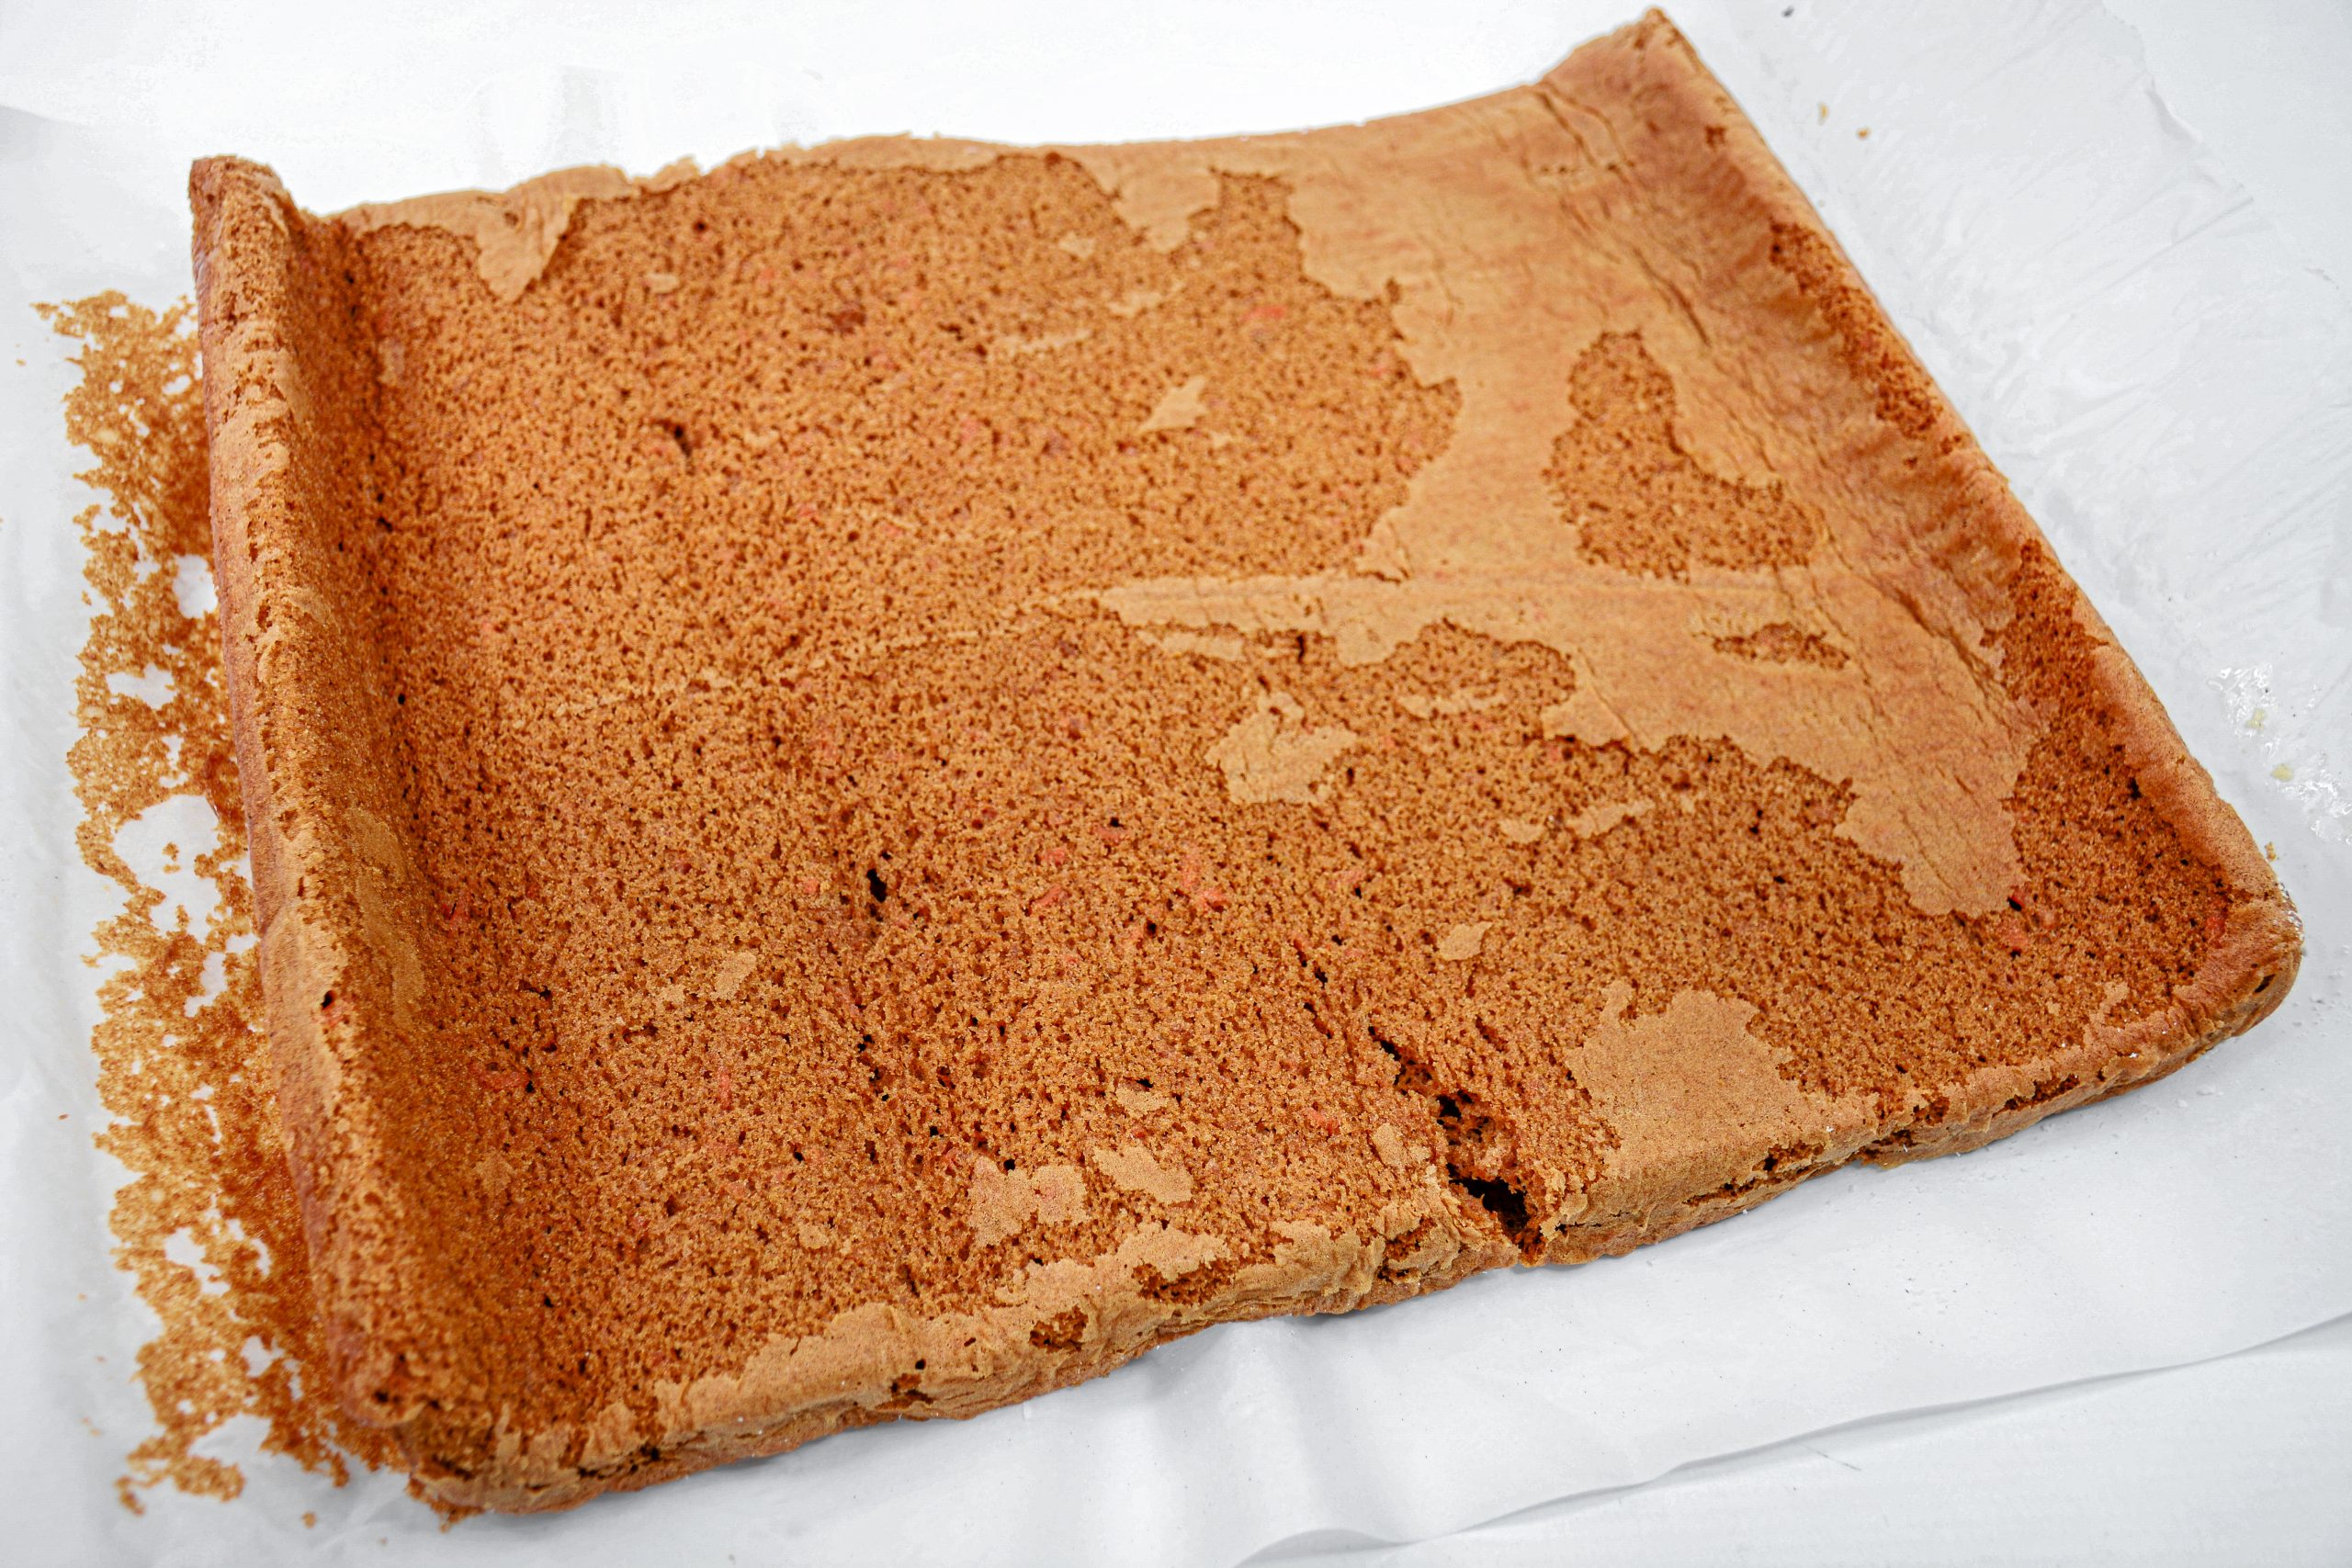 Slowly unroll the cake, carefully peel off the parchment paper.